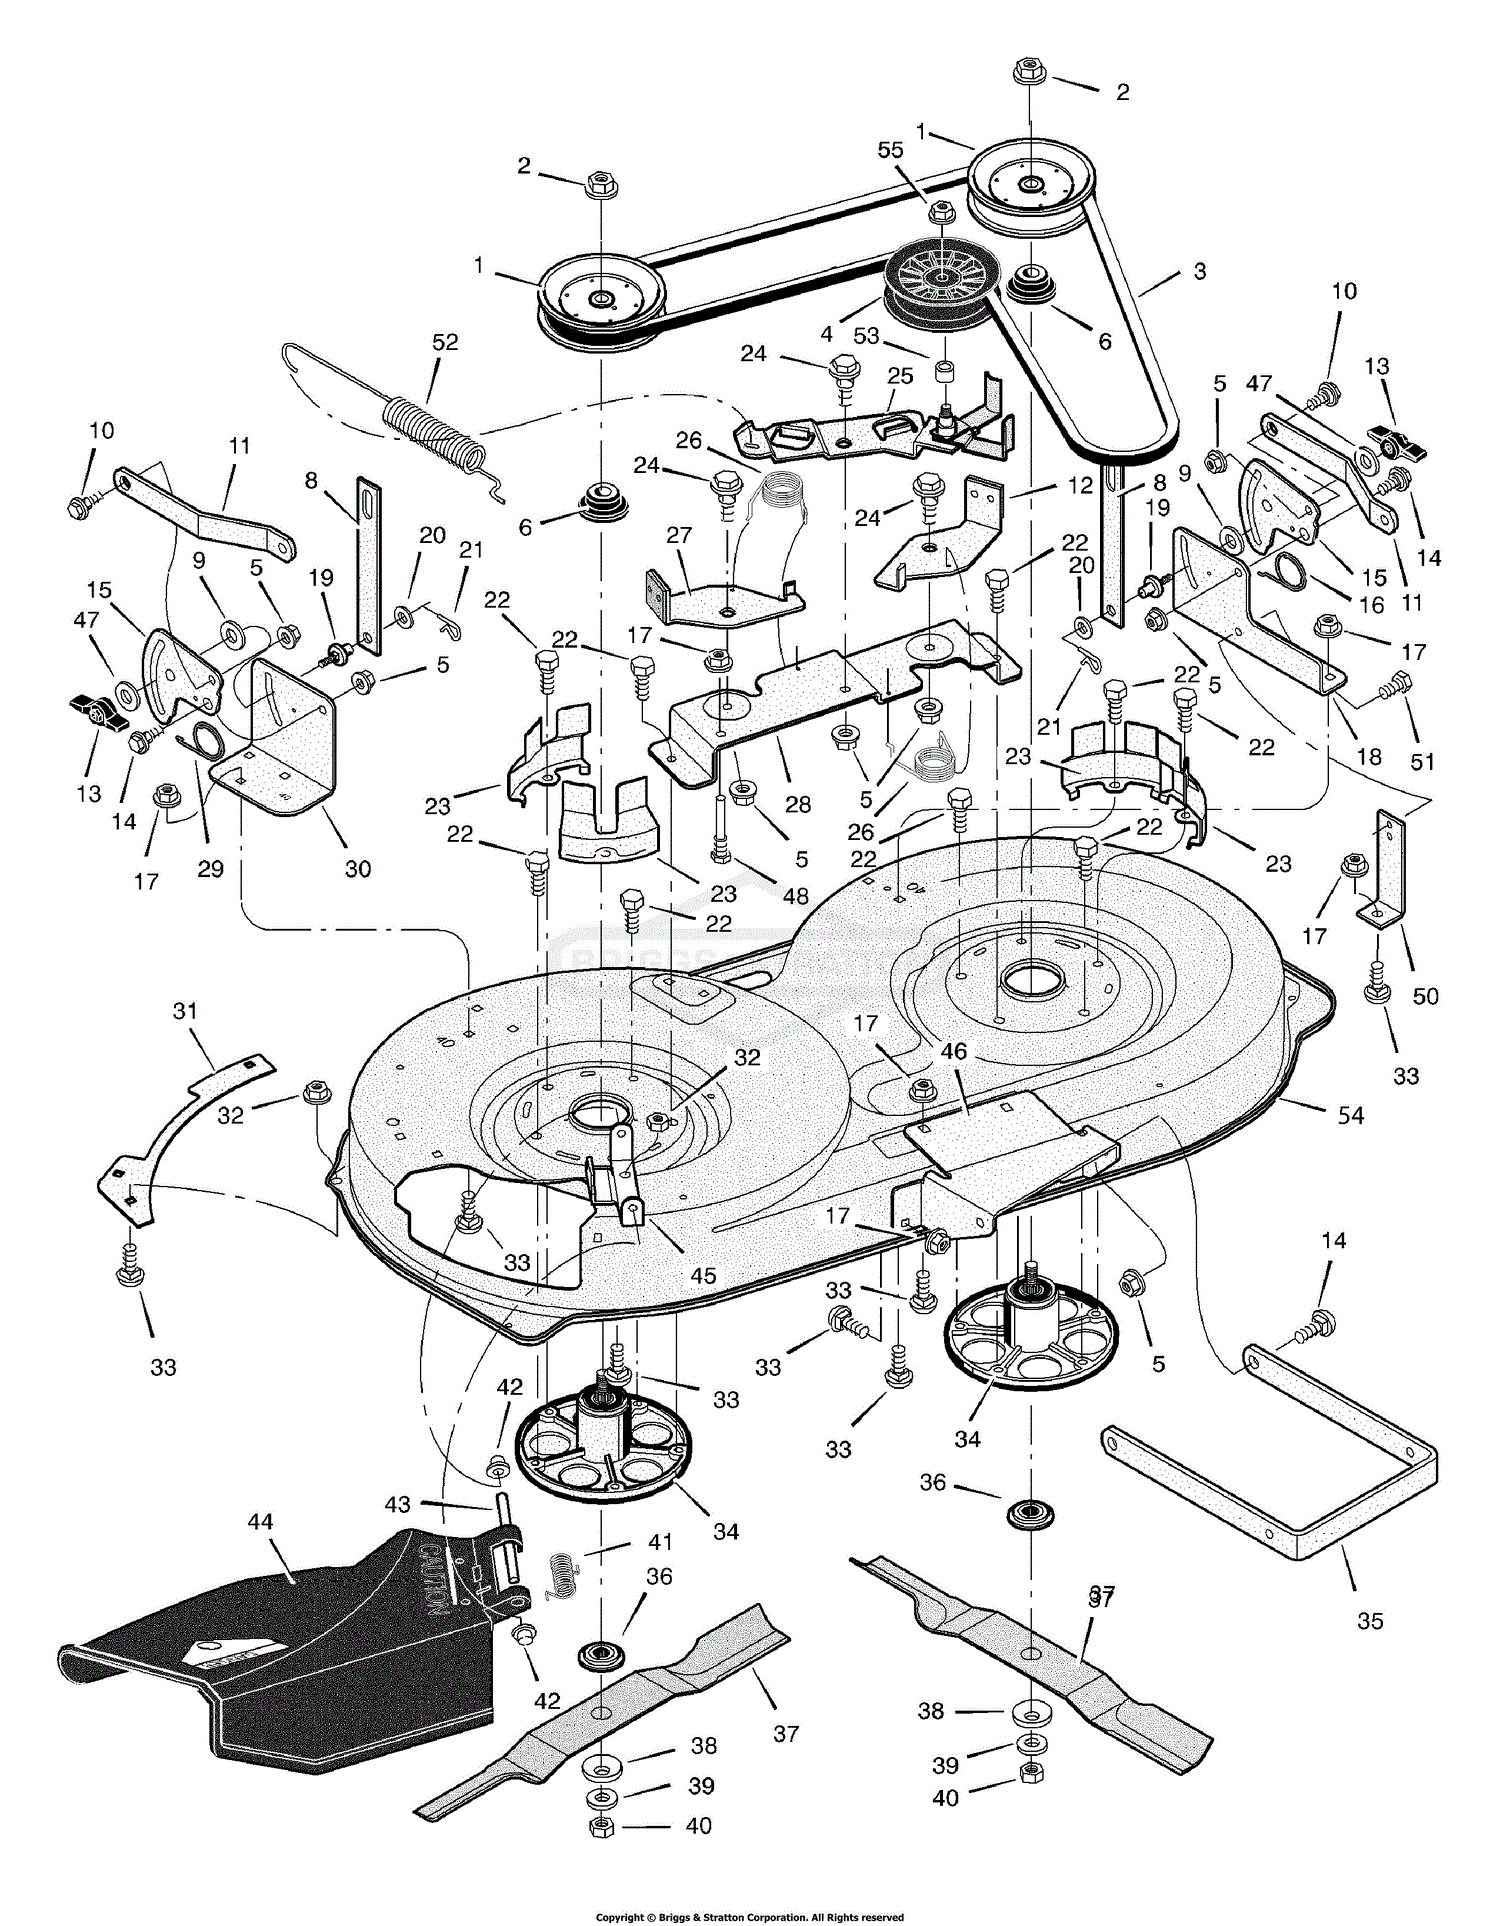 Ego Lawn Mower Parts Diagram Looking For Murray Model 96114002601 Gas